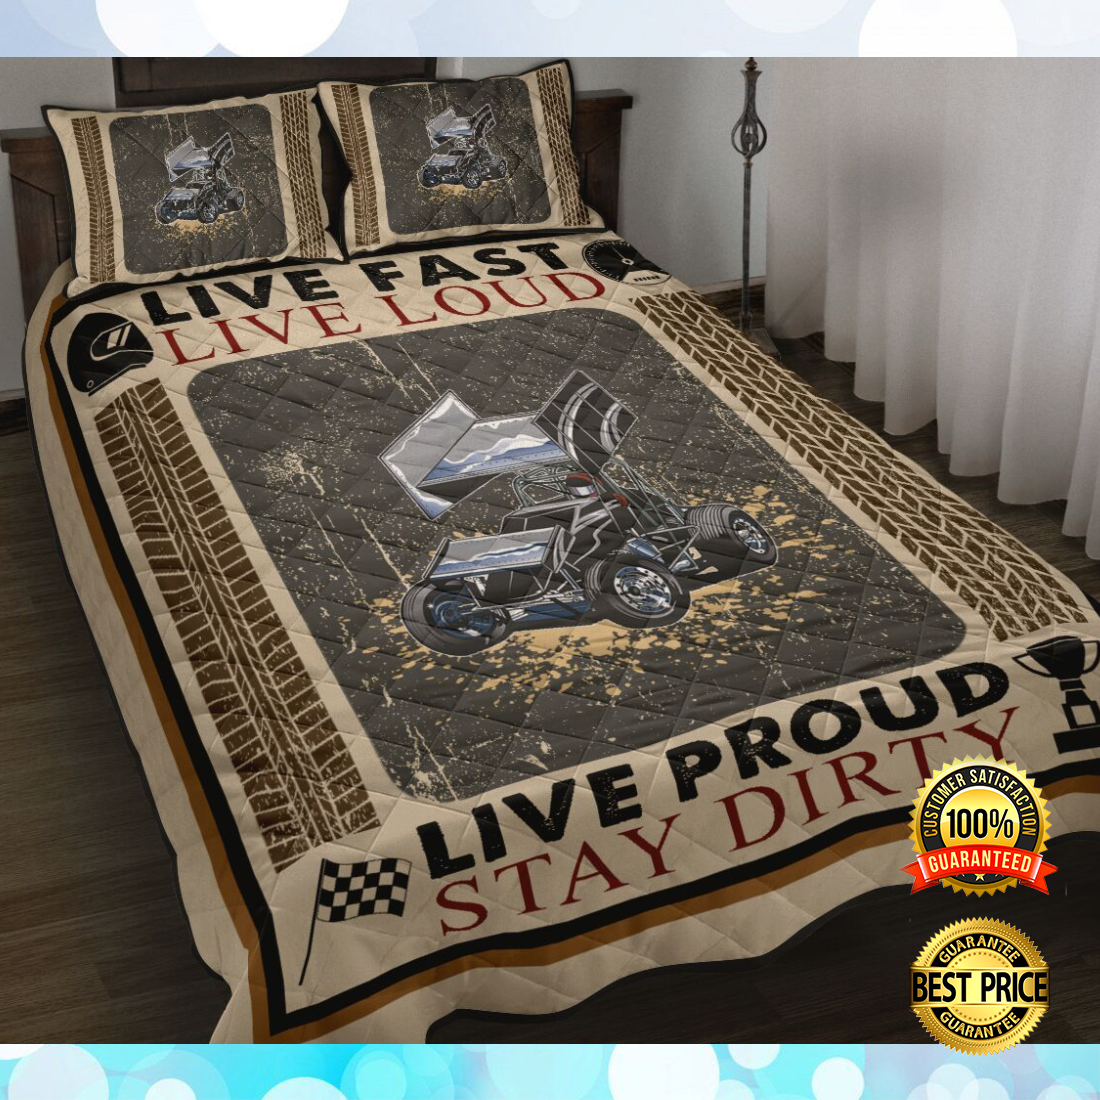 Live fast live loud live proud stay dirty bedding set 5